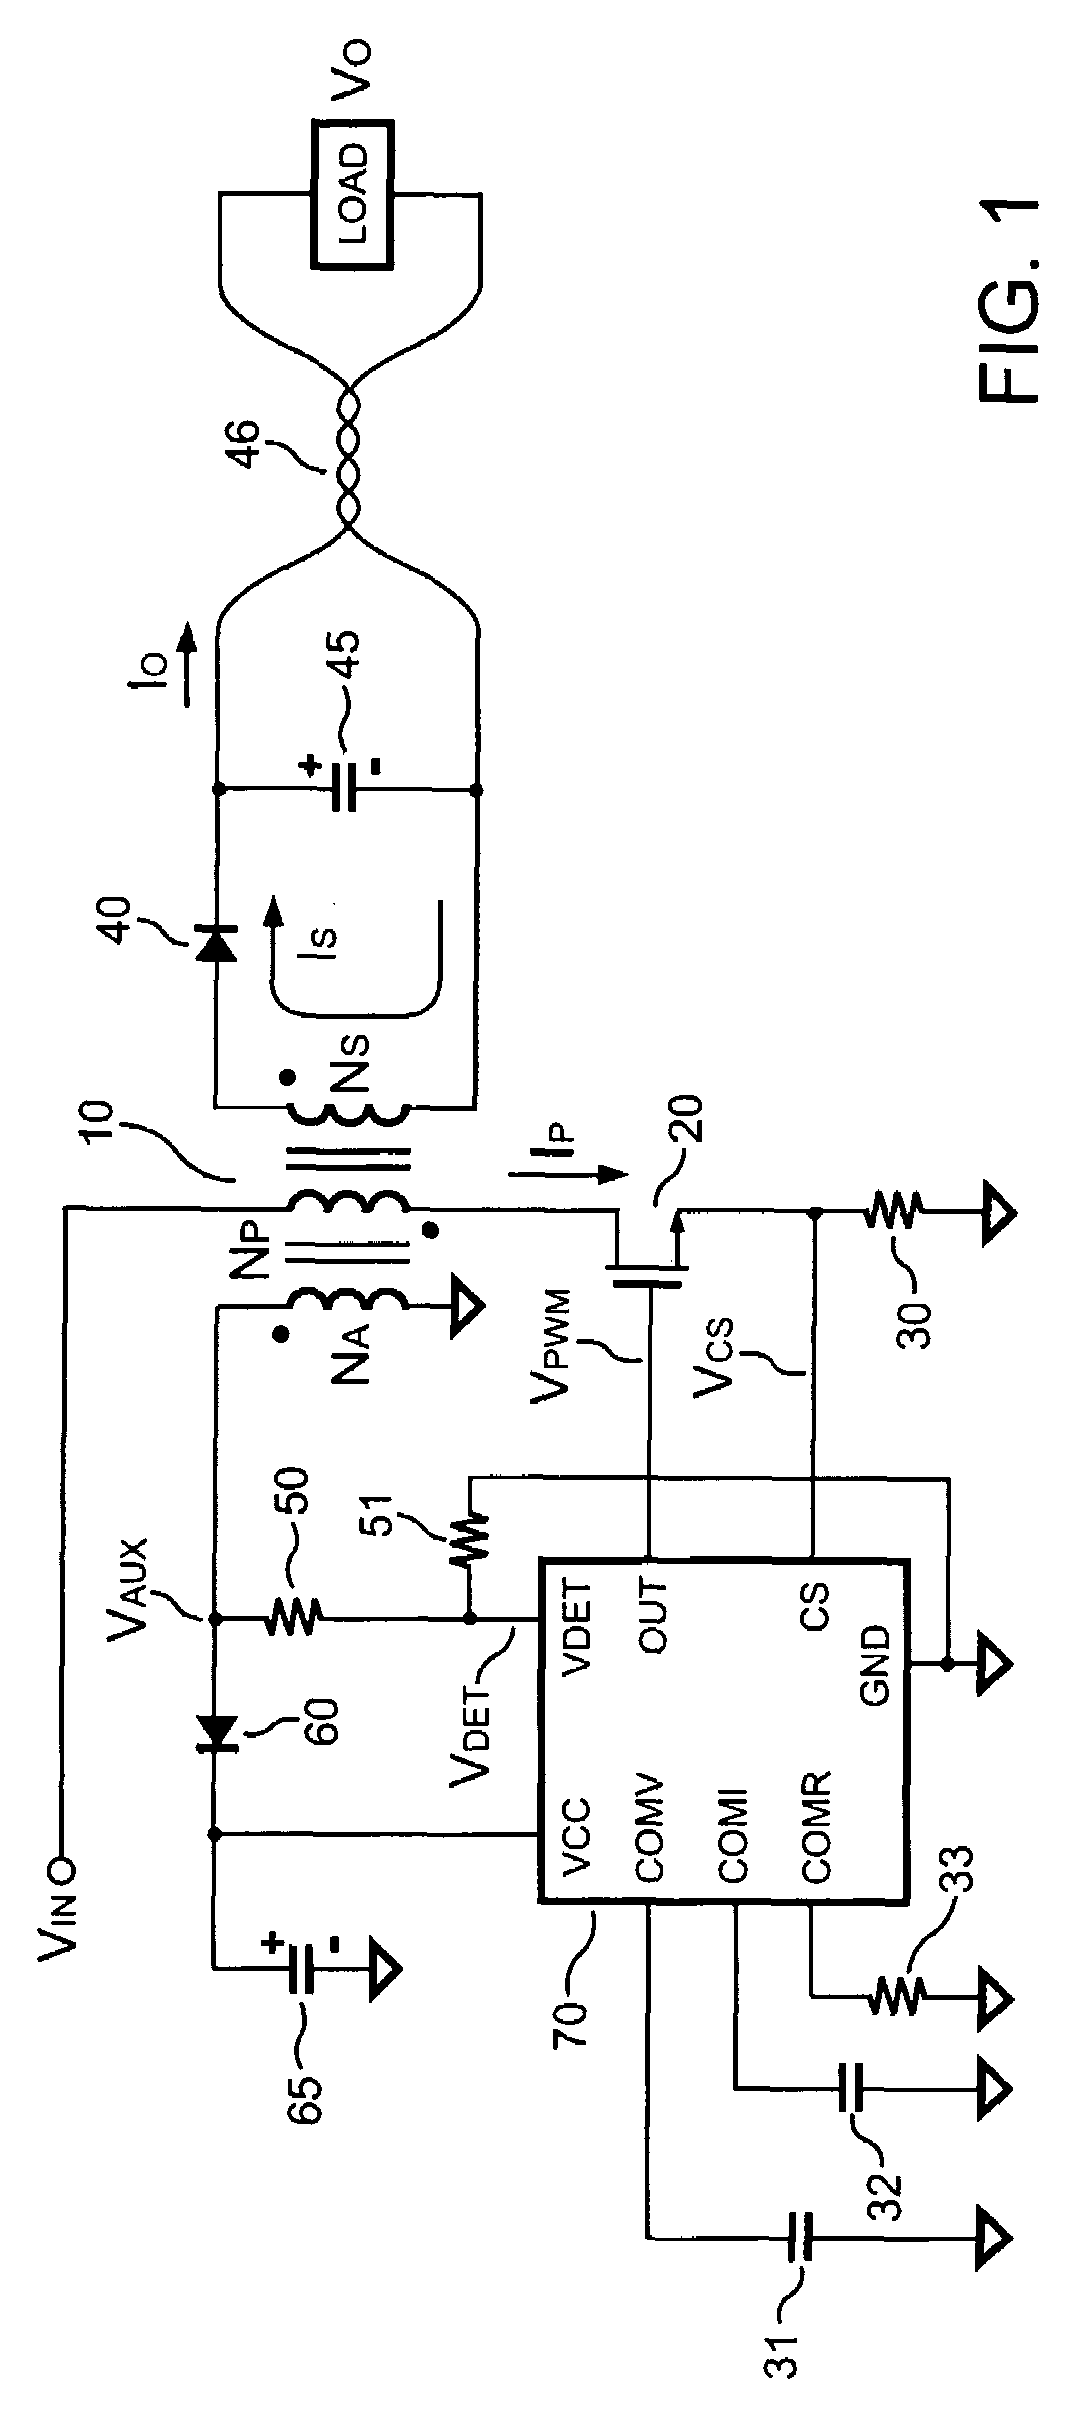 Primary-side controlled switching regulator